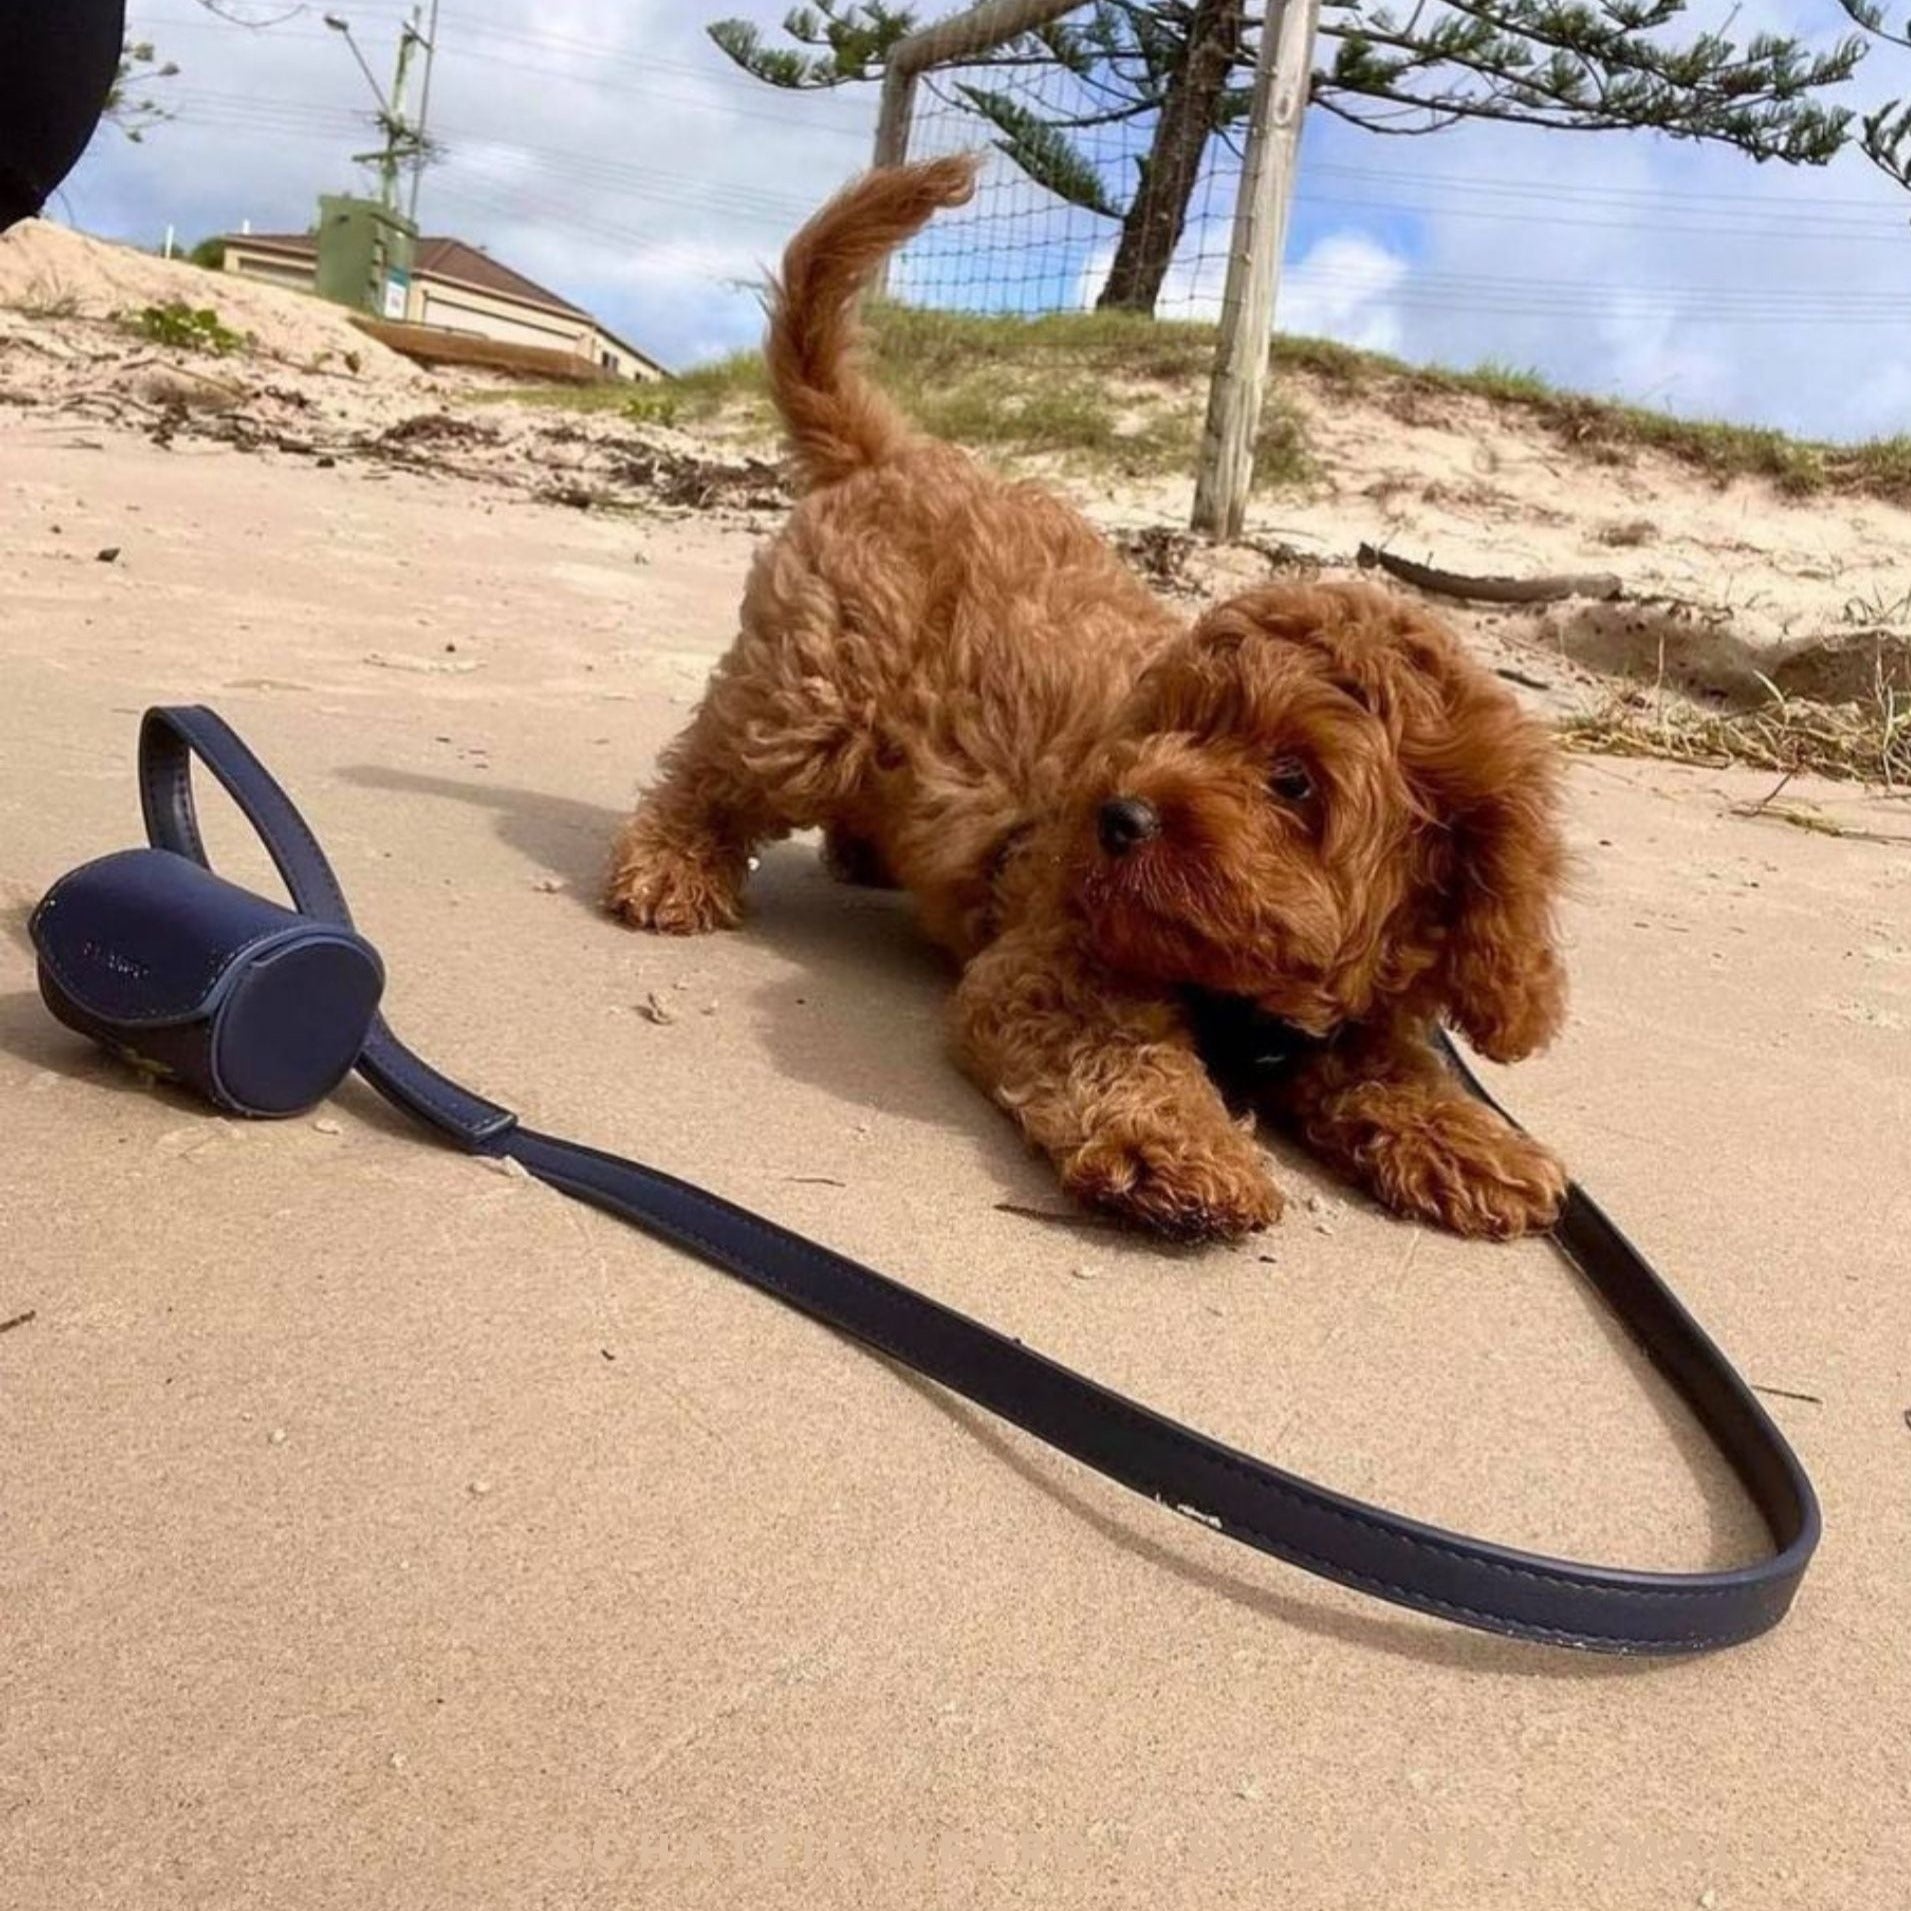 navy blue poop bag holder on dog lead with cavoodle puppy